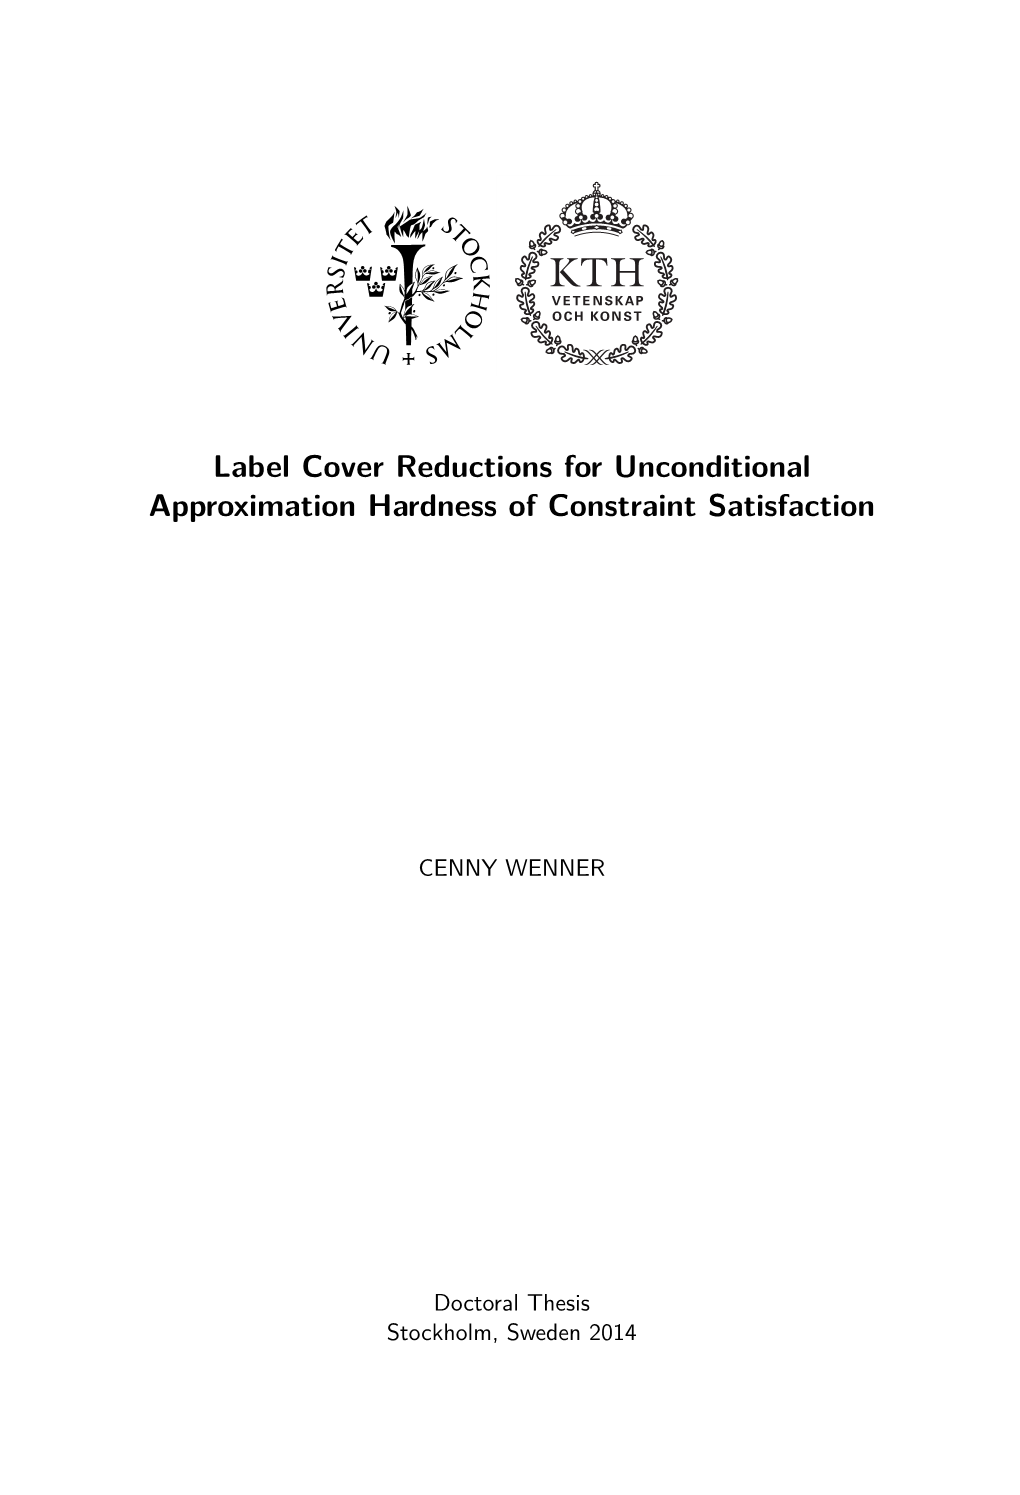 Label Cover Reductions for Unconditional Approximation Hardness of Constraint Satisfaction